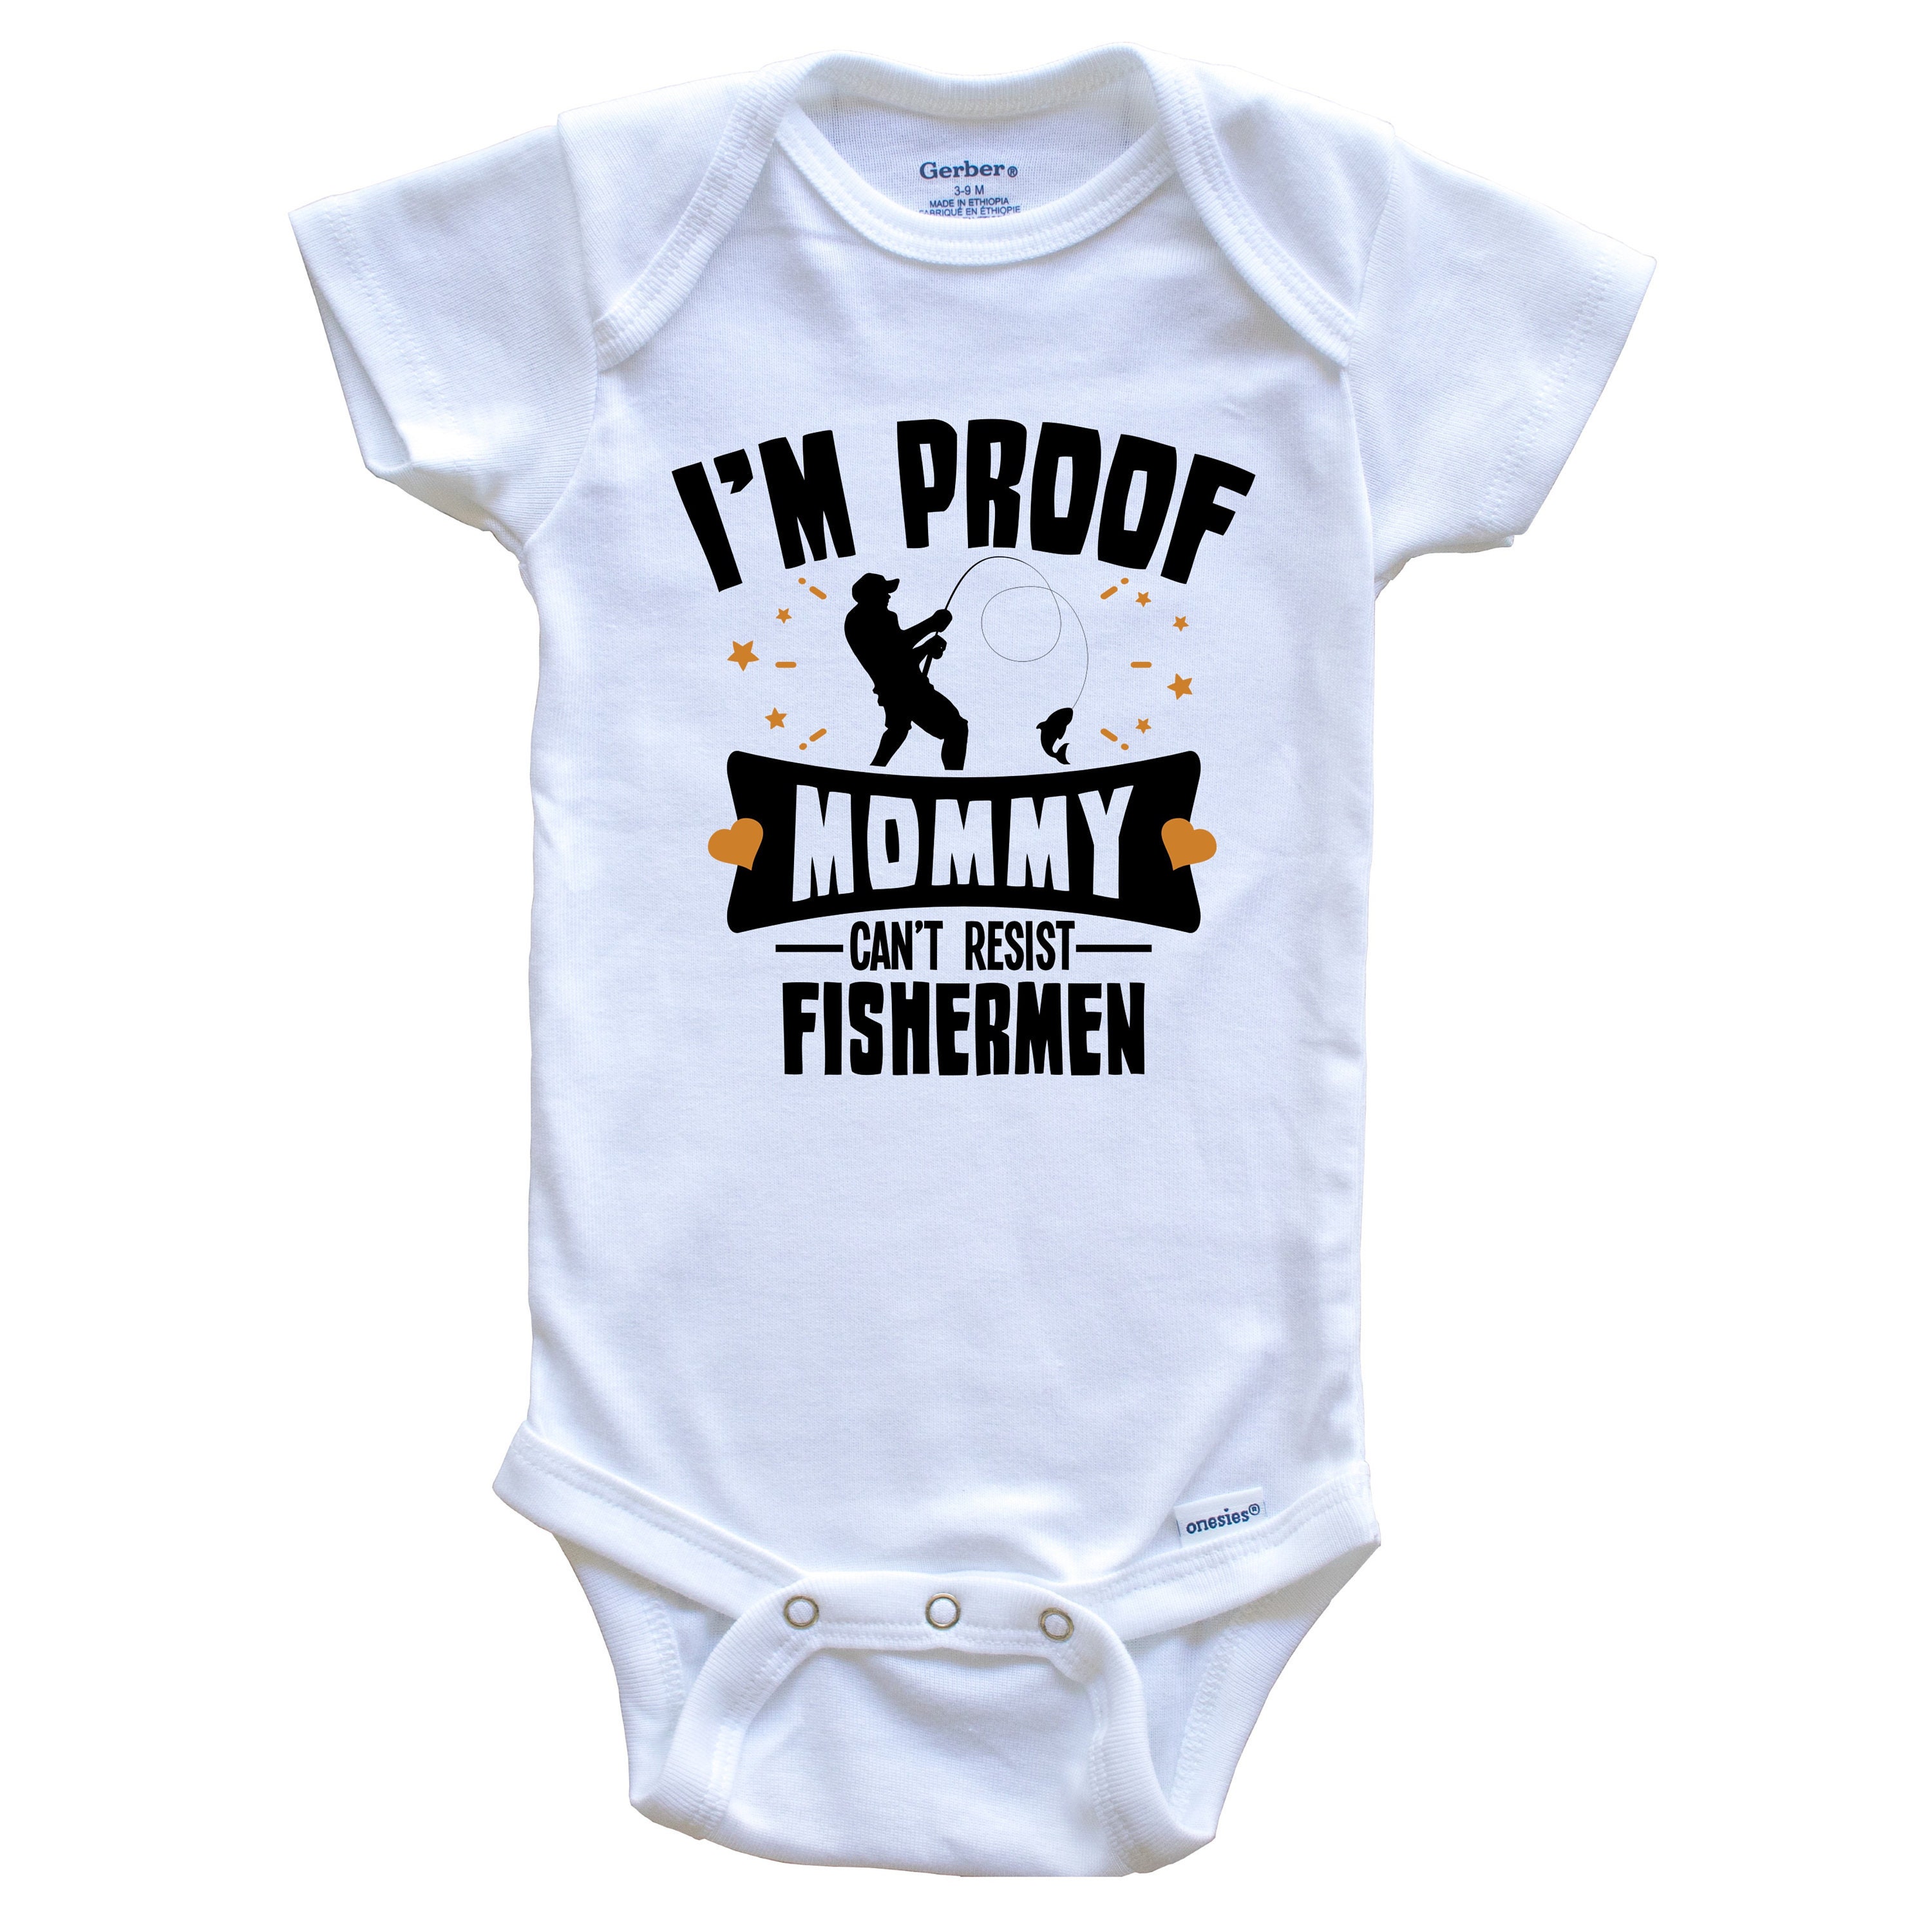 Funny Fishing Baby Bodysuit I'm Proof Mommy Can't Resist Fishermen